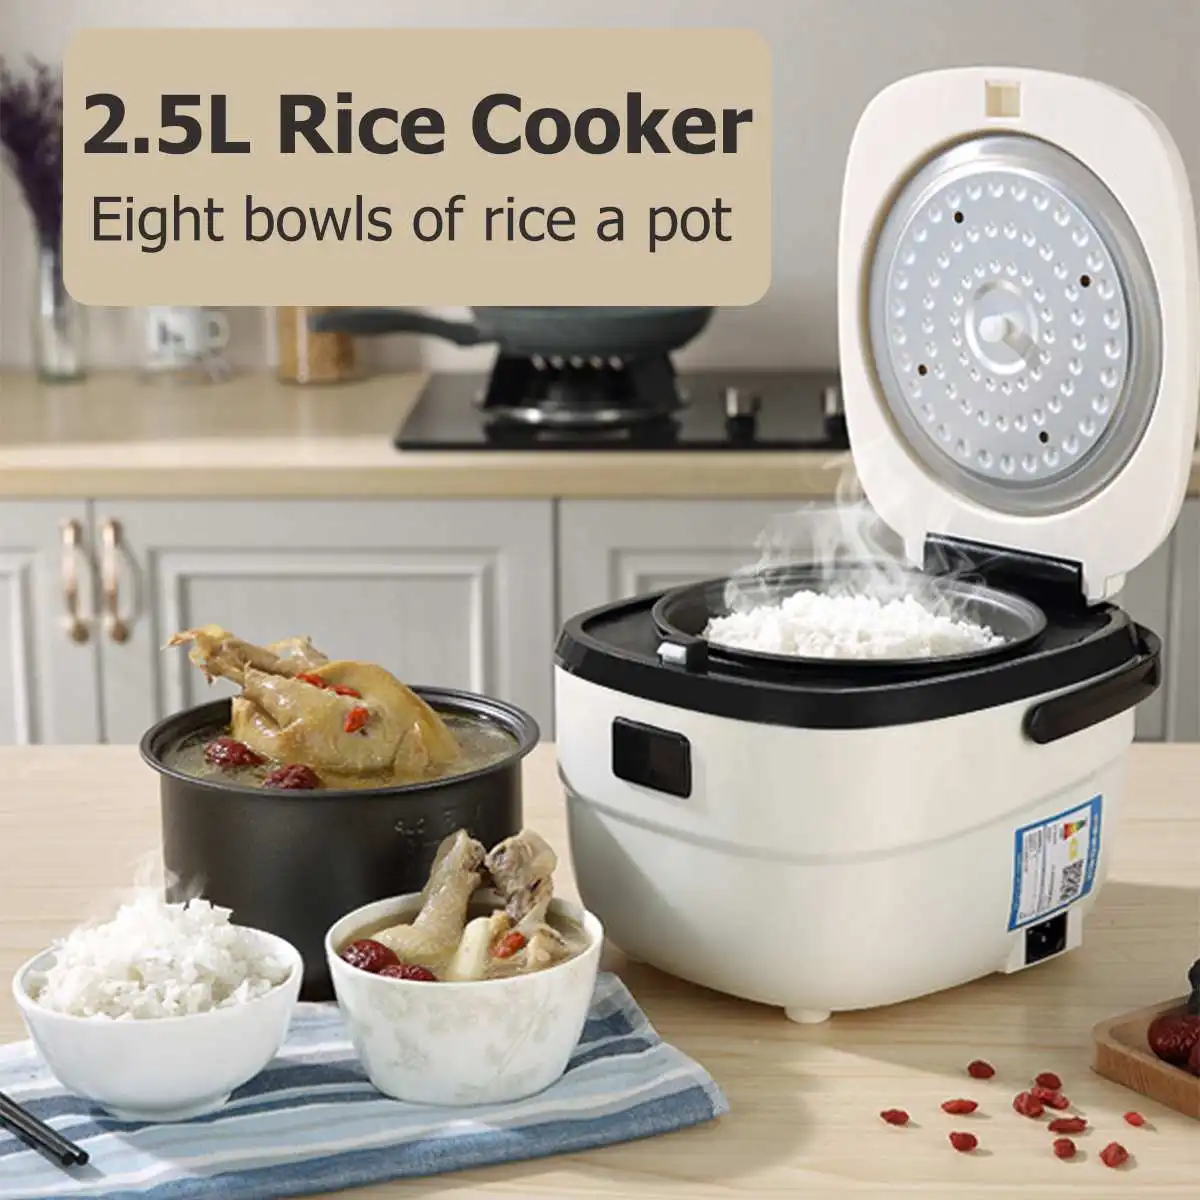 

2.5L Electric Rice Cooker Rice Cooking Machine Multifunction Cooking Steamer Smart Automatic 5 layer Non-Stick Coating Inner Pan